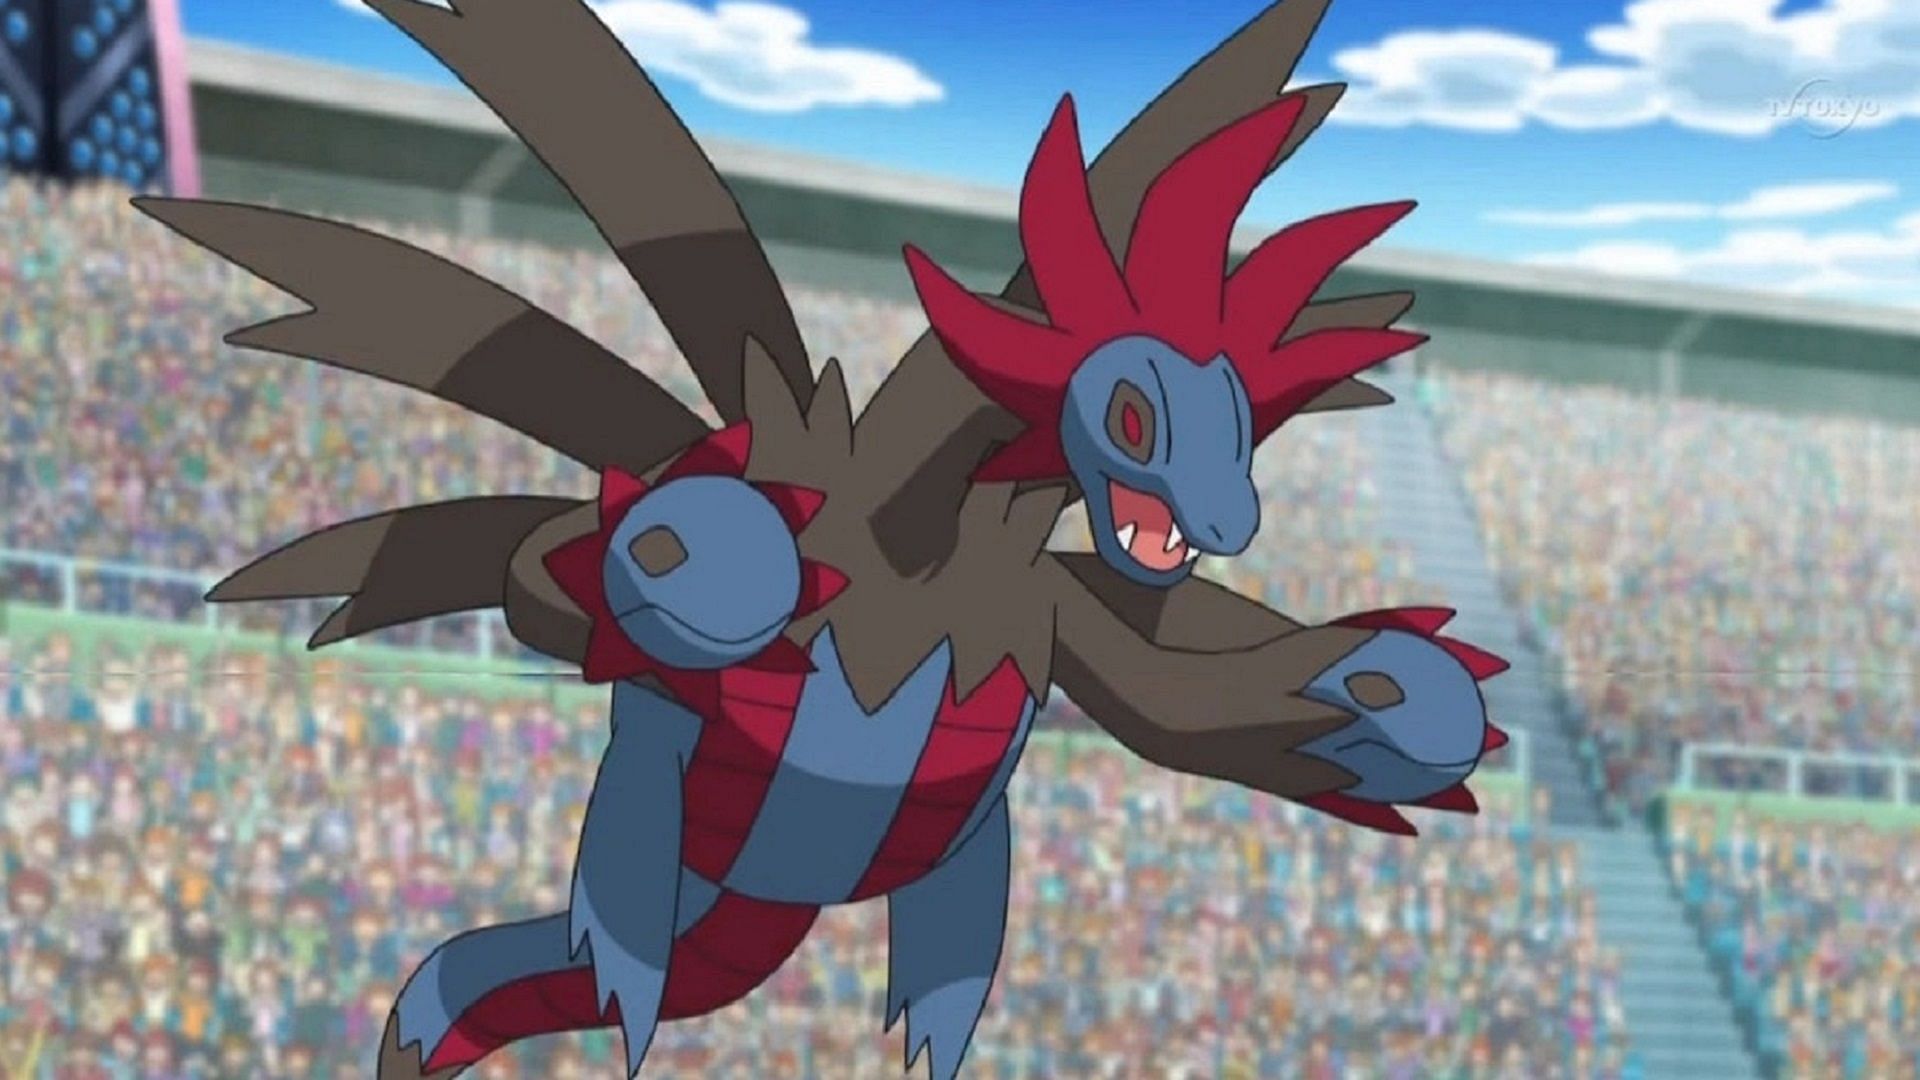 Moves like Draco Meteor can be devastating in Hydreigon&#039;s hands (Image via The Pokemon Company)